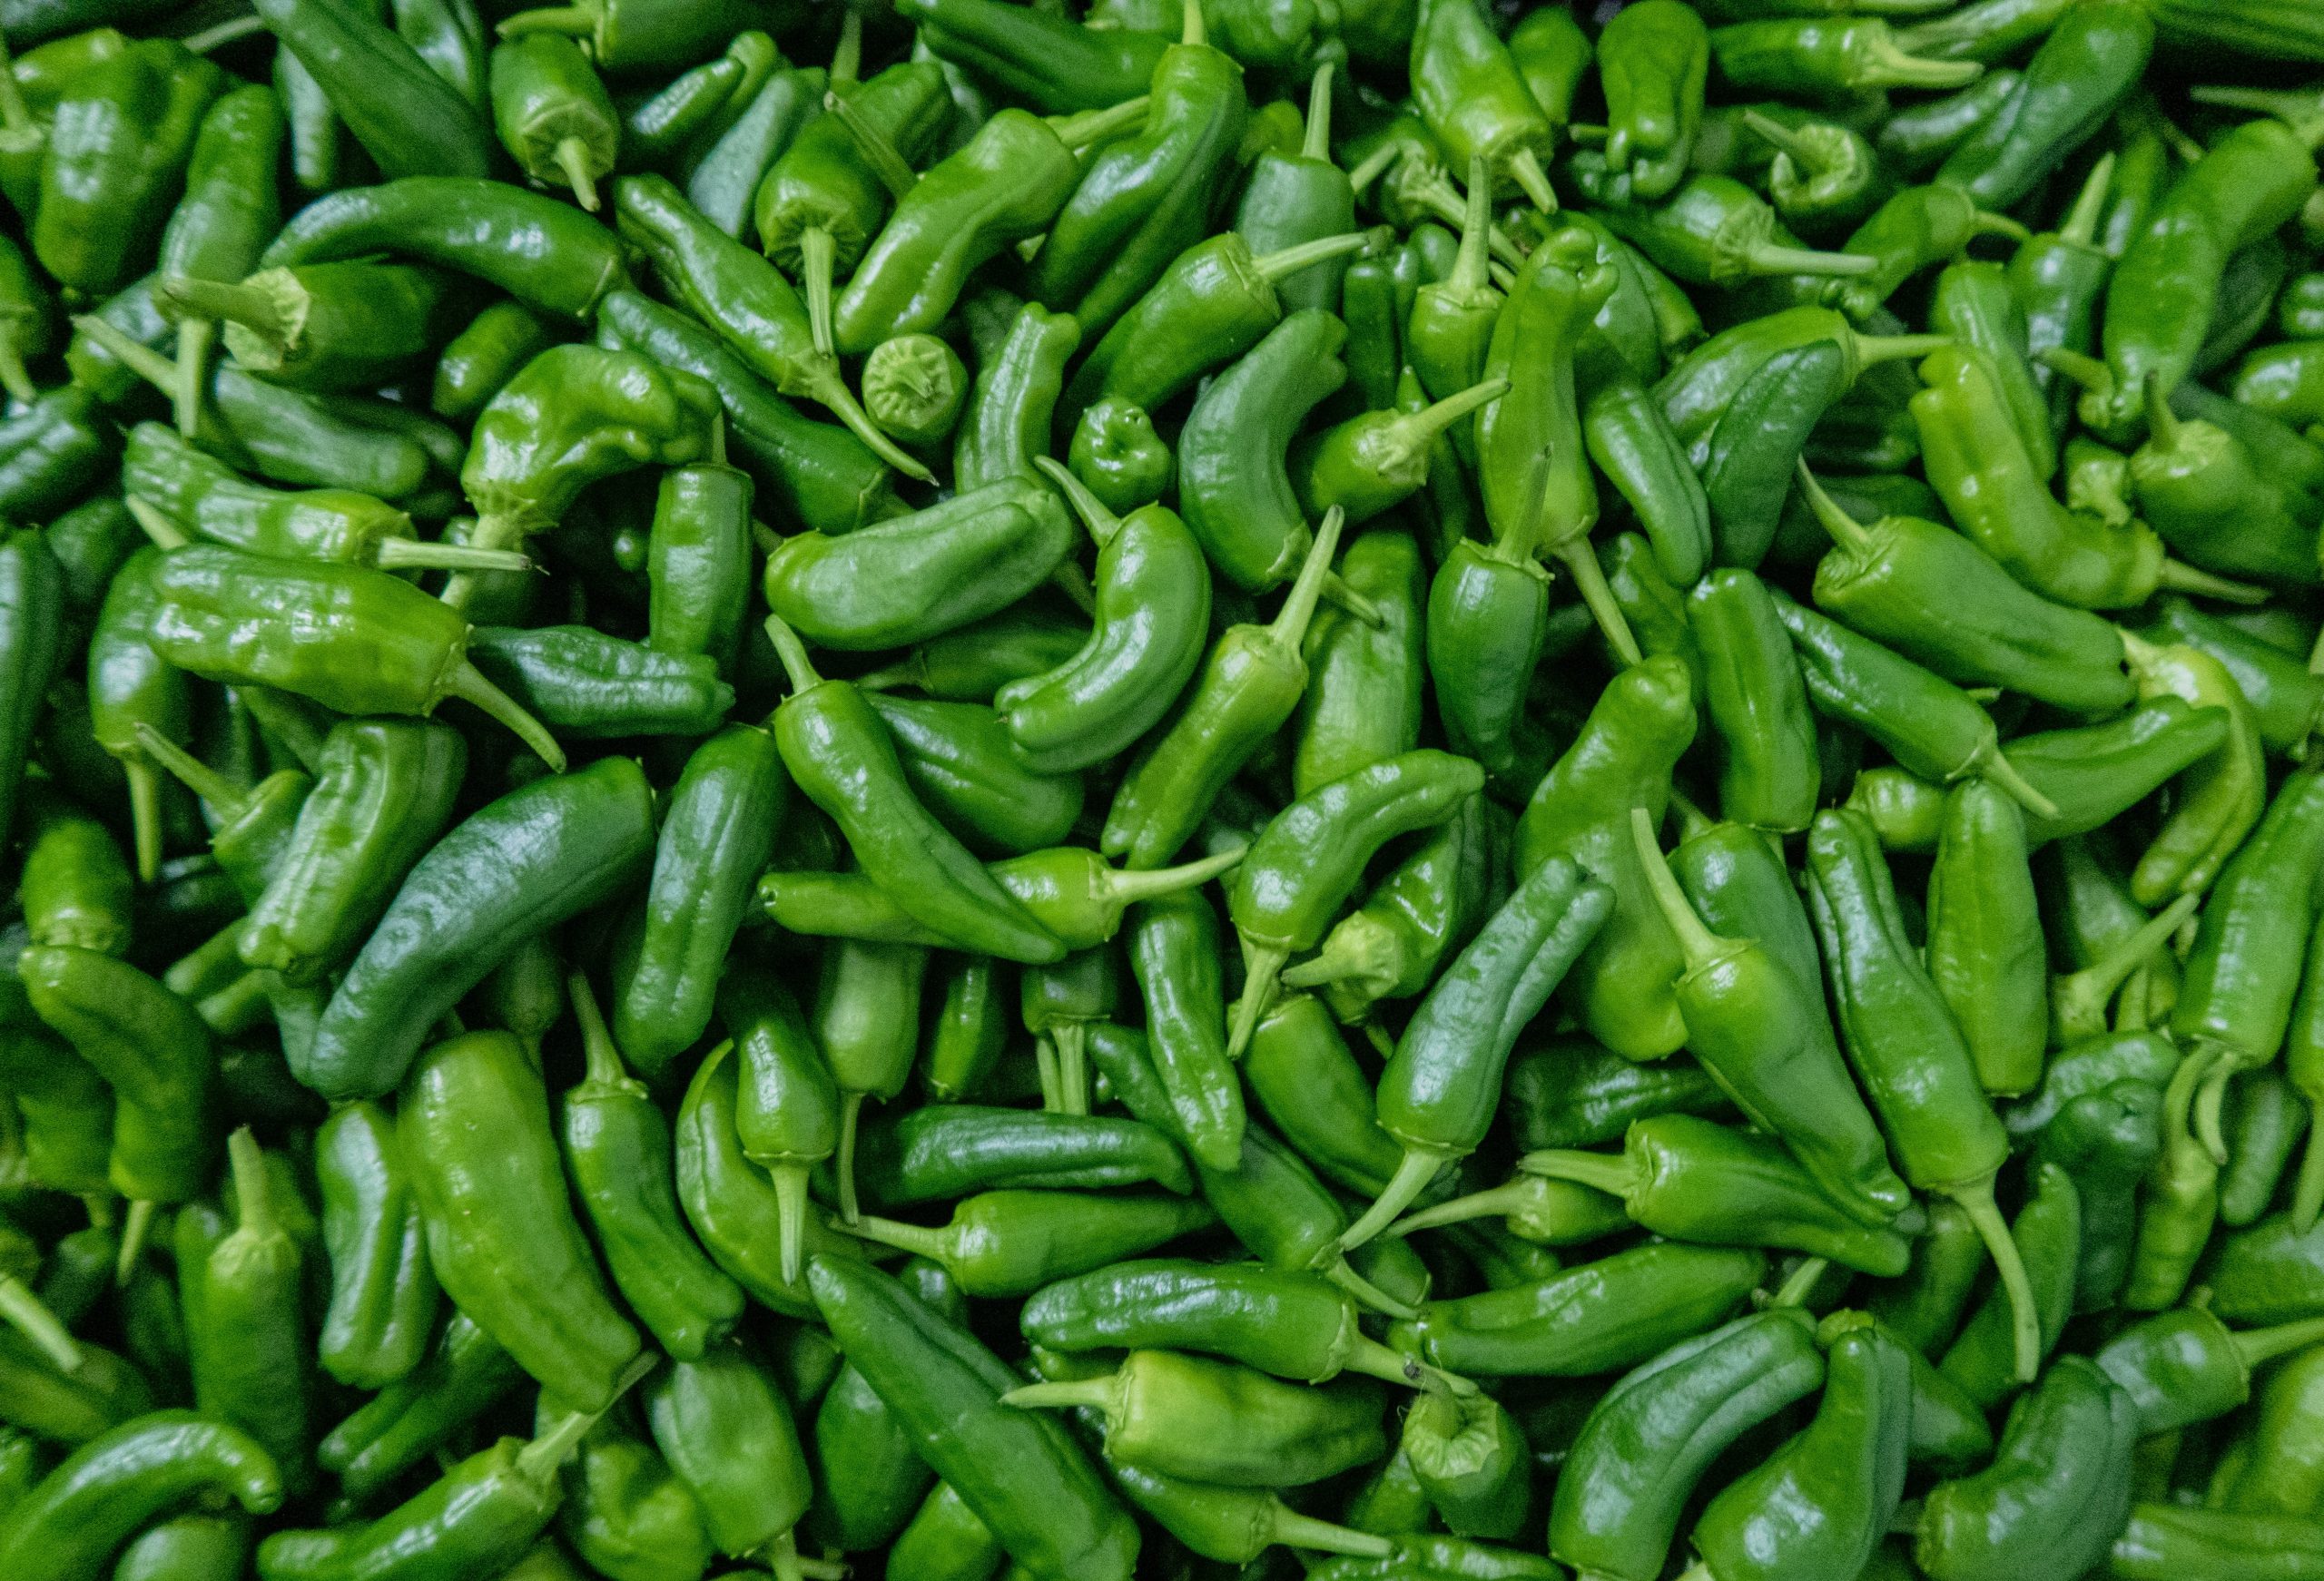 What Are Shishito Peppers? – CRJ Produce